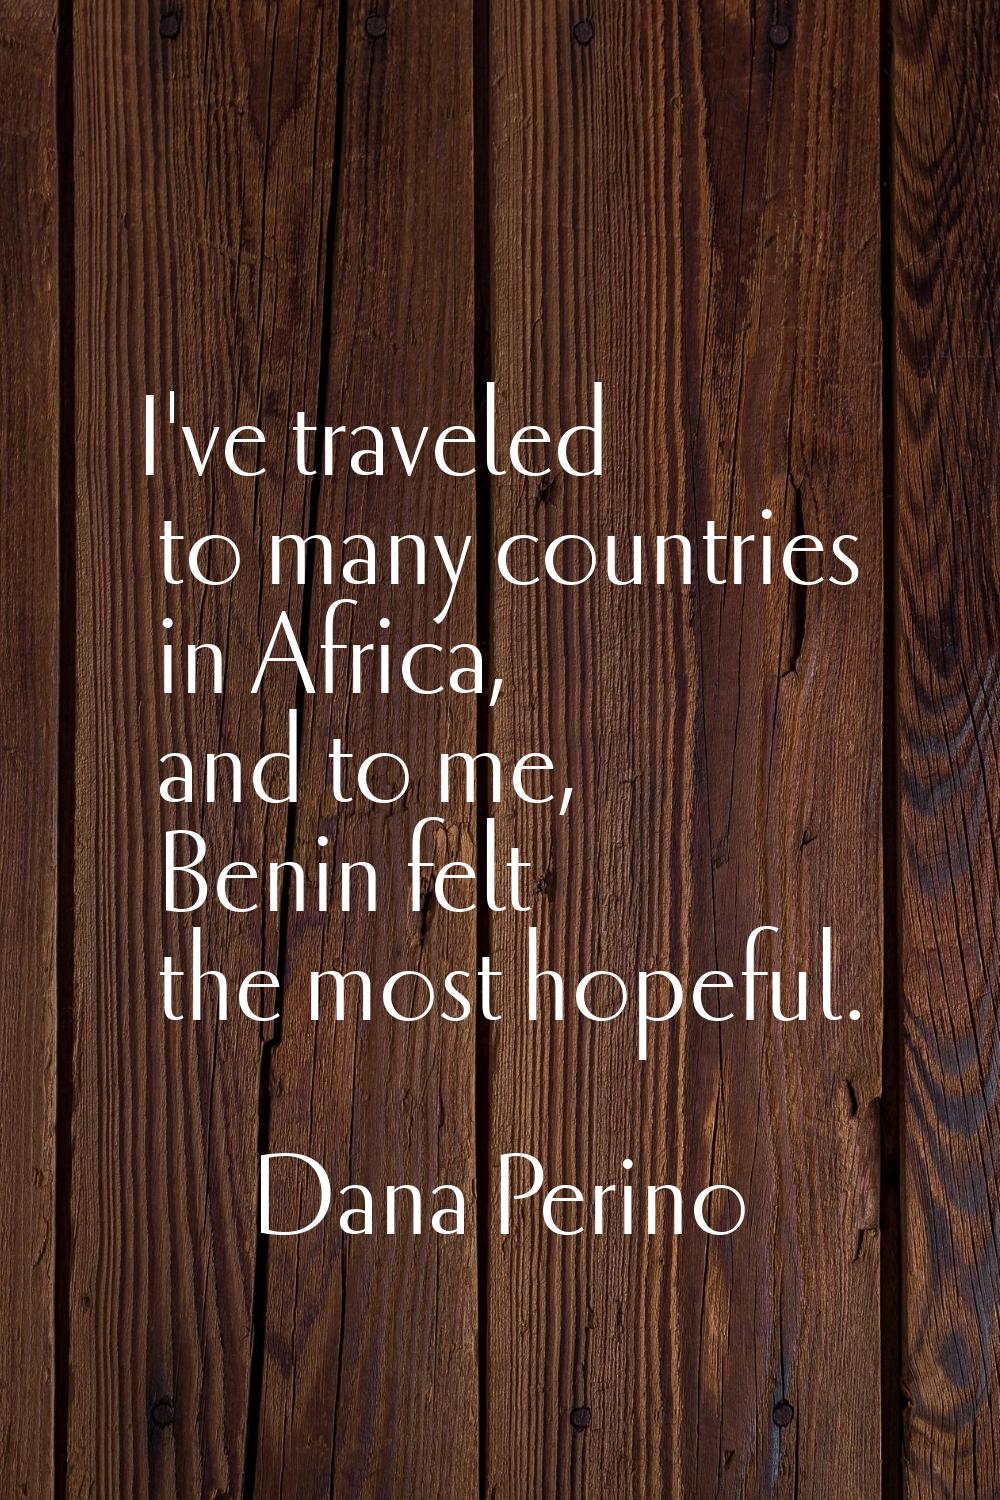 I've traveled to many countries in Africa, and to me, Benin felt the most hopeful.